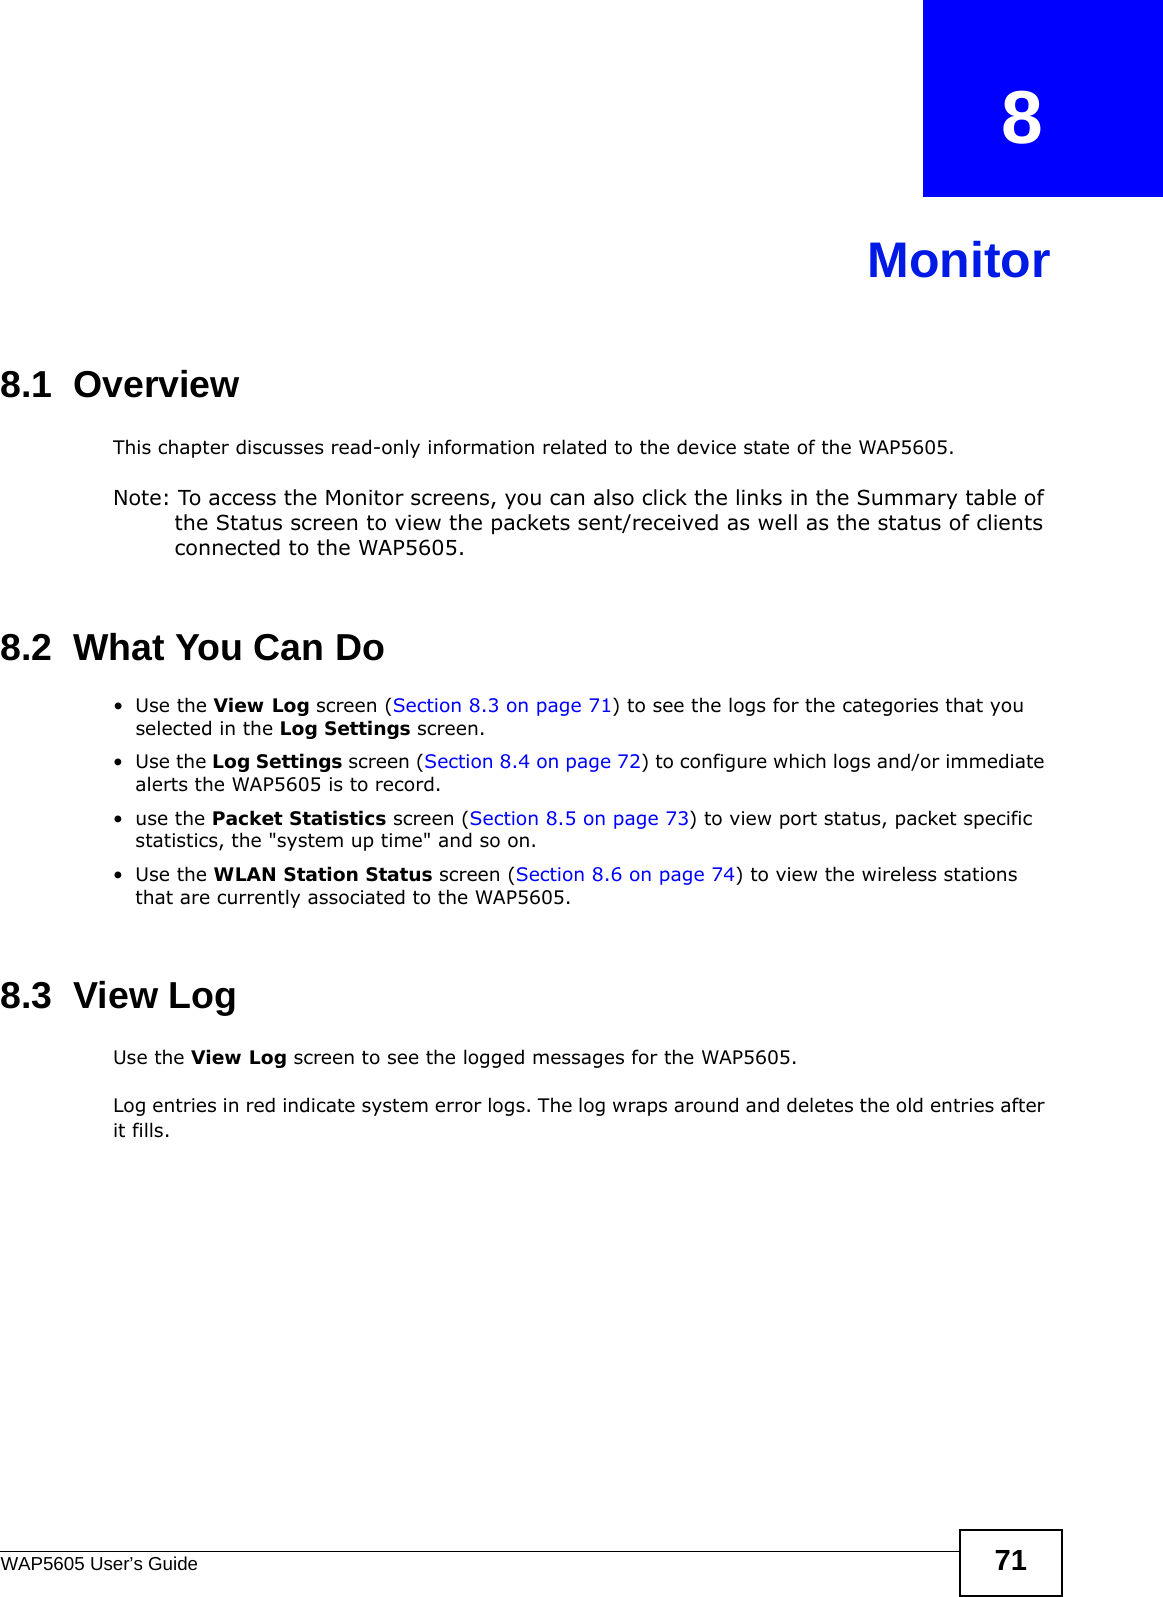 WAP5605 User’s Guide 71CHAPTER   8Monitor8.1  OverviewThis chapter discusses read-only information related to the device state of the WAP5605. Note: To access the Monitor screens, you can also click the links in the Summary table of the Status screen to view the packets sent/received as well as the status of clients connected to the WAP5605.8.2  What You Can Do•Use the View Log screen (Section 8.3 on page 71) to see the logs for the categories that you selected in the Log Settings screen.•Use the Log Settings screen (Section 8.4 on page 72) to configure which logs and/or immediate alerts the WAP5605 is to record.•use the Packet Statistics screen (Section 8.5 on page 73) to view port status, packet specific statistics, the &quot;system up time&quot; and so on.•Use the WLAN Station Status screen (Section 8.6 on page 74) to view the wireless stations that are currently associated to the WAP5605.8.3  View LogUse the View Log screen to see the logged messages for the WAP5605. Log entries in red indicate system error logs. The log wraps around and deletes the old entries after it fills. 